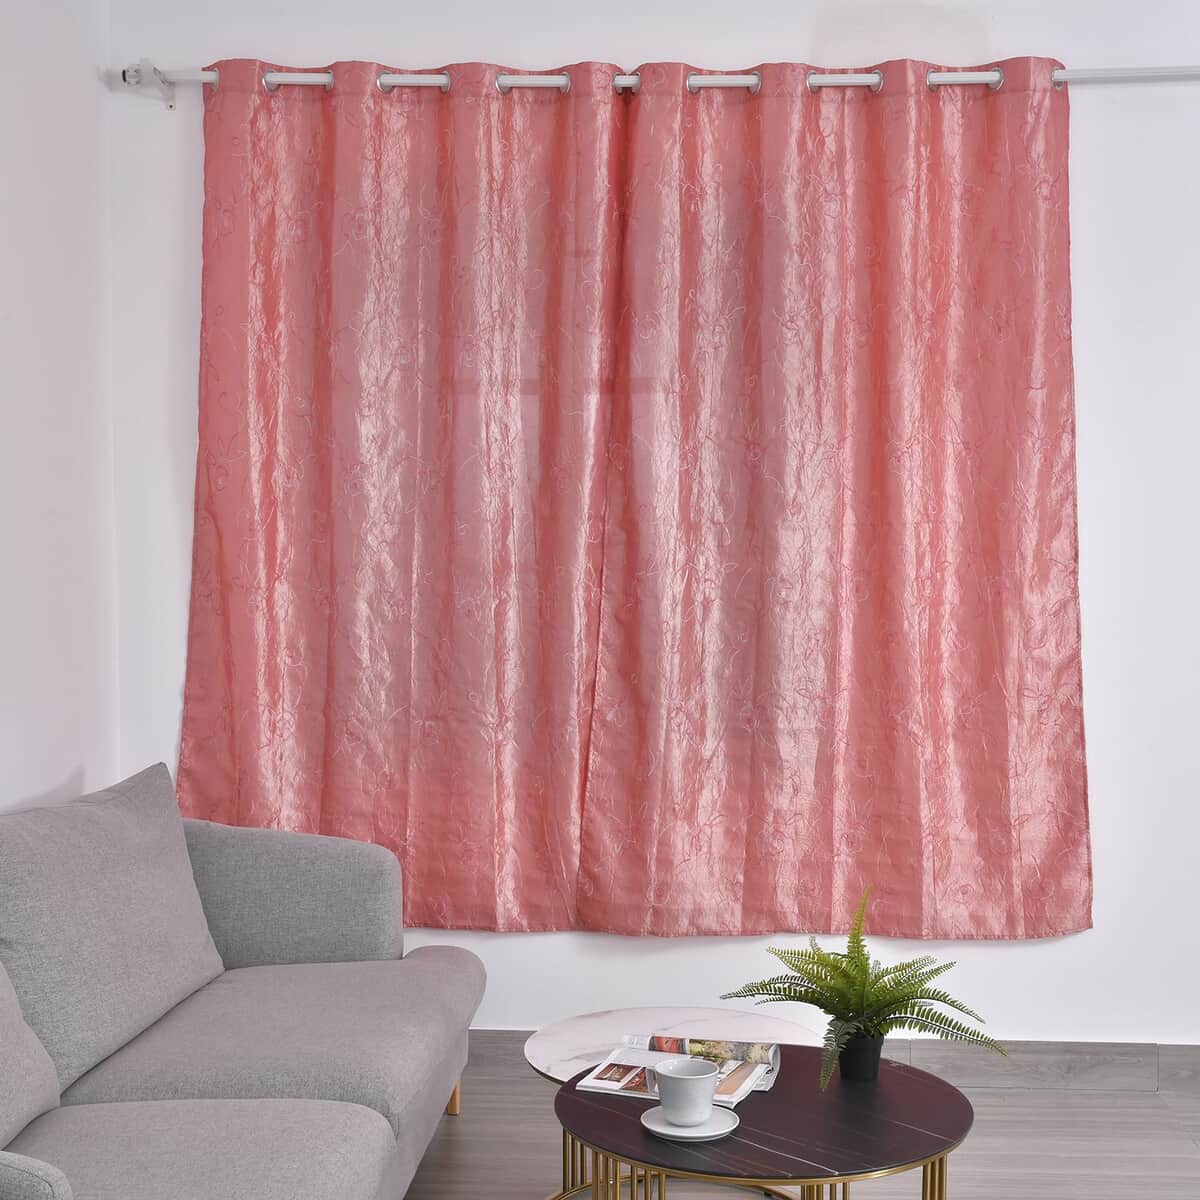 Set of 2 Pink Embroidered Polyester Curtains with 8 Metal Grommets, Handwash Grommets Curtains Set For Door and Windows image number 1